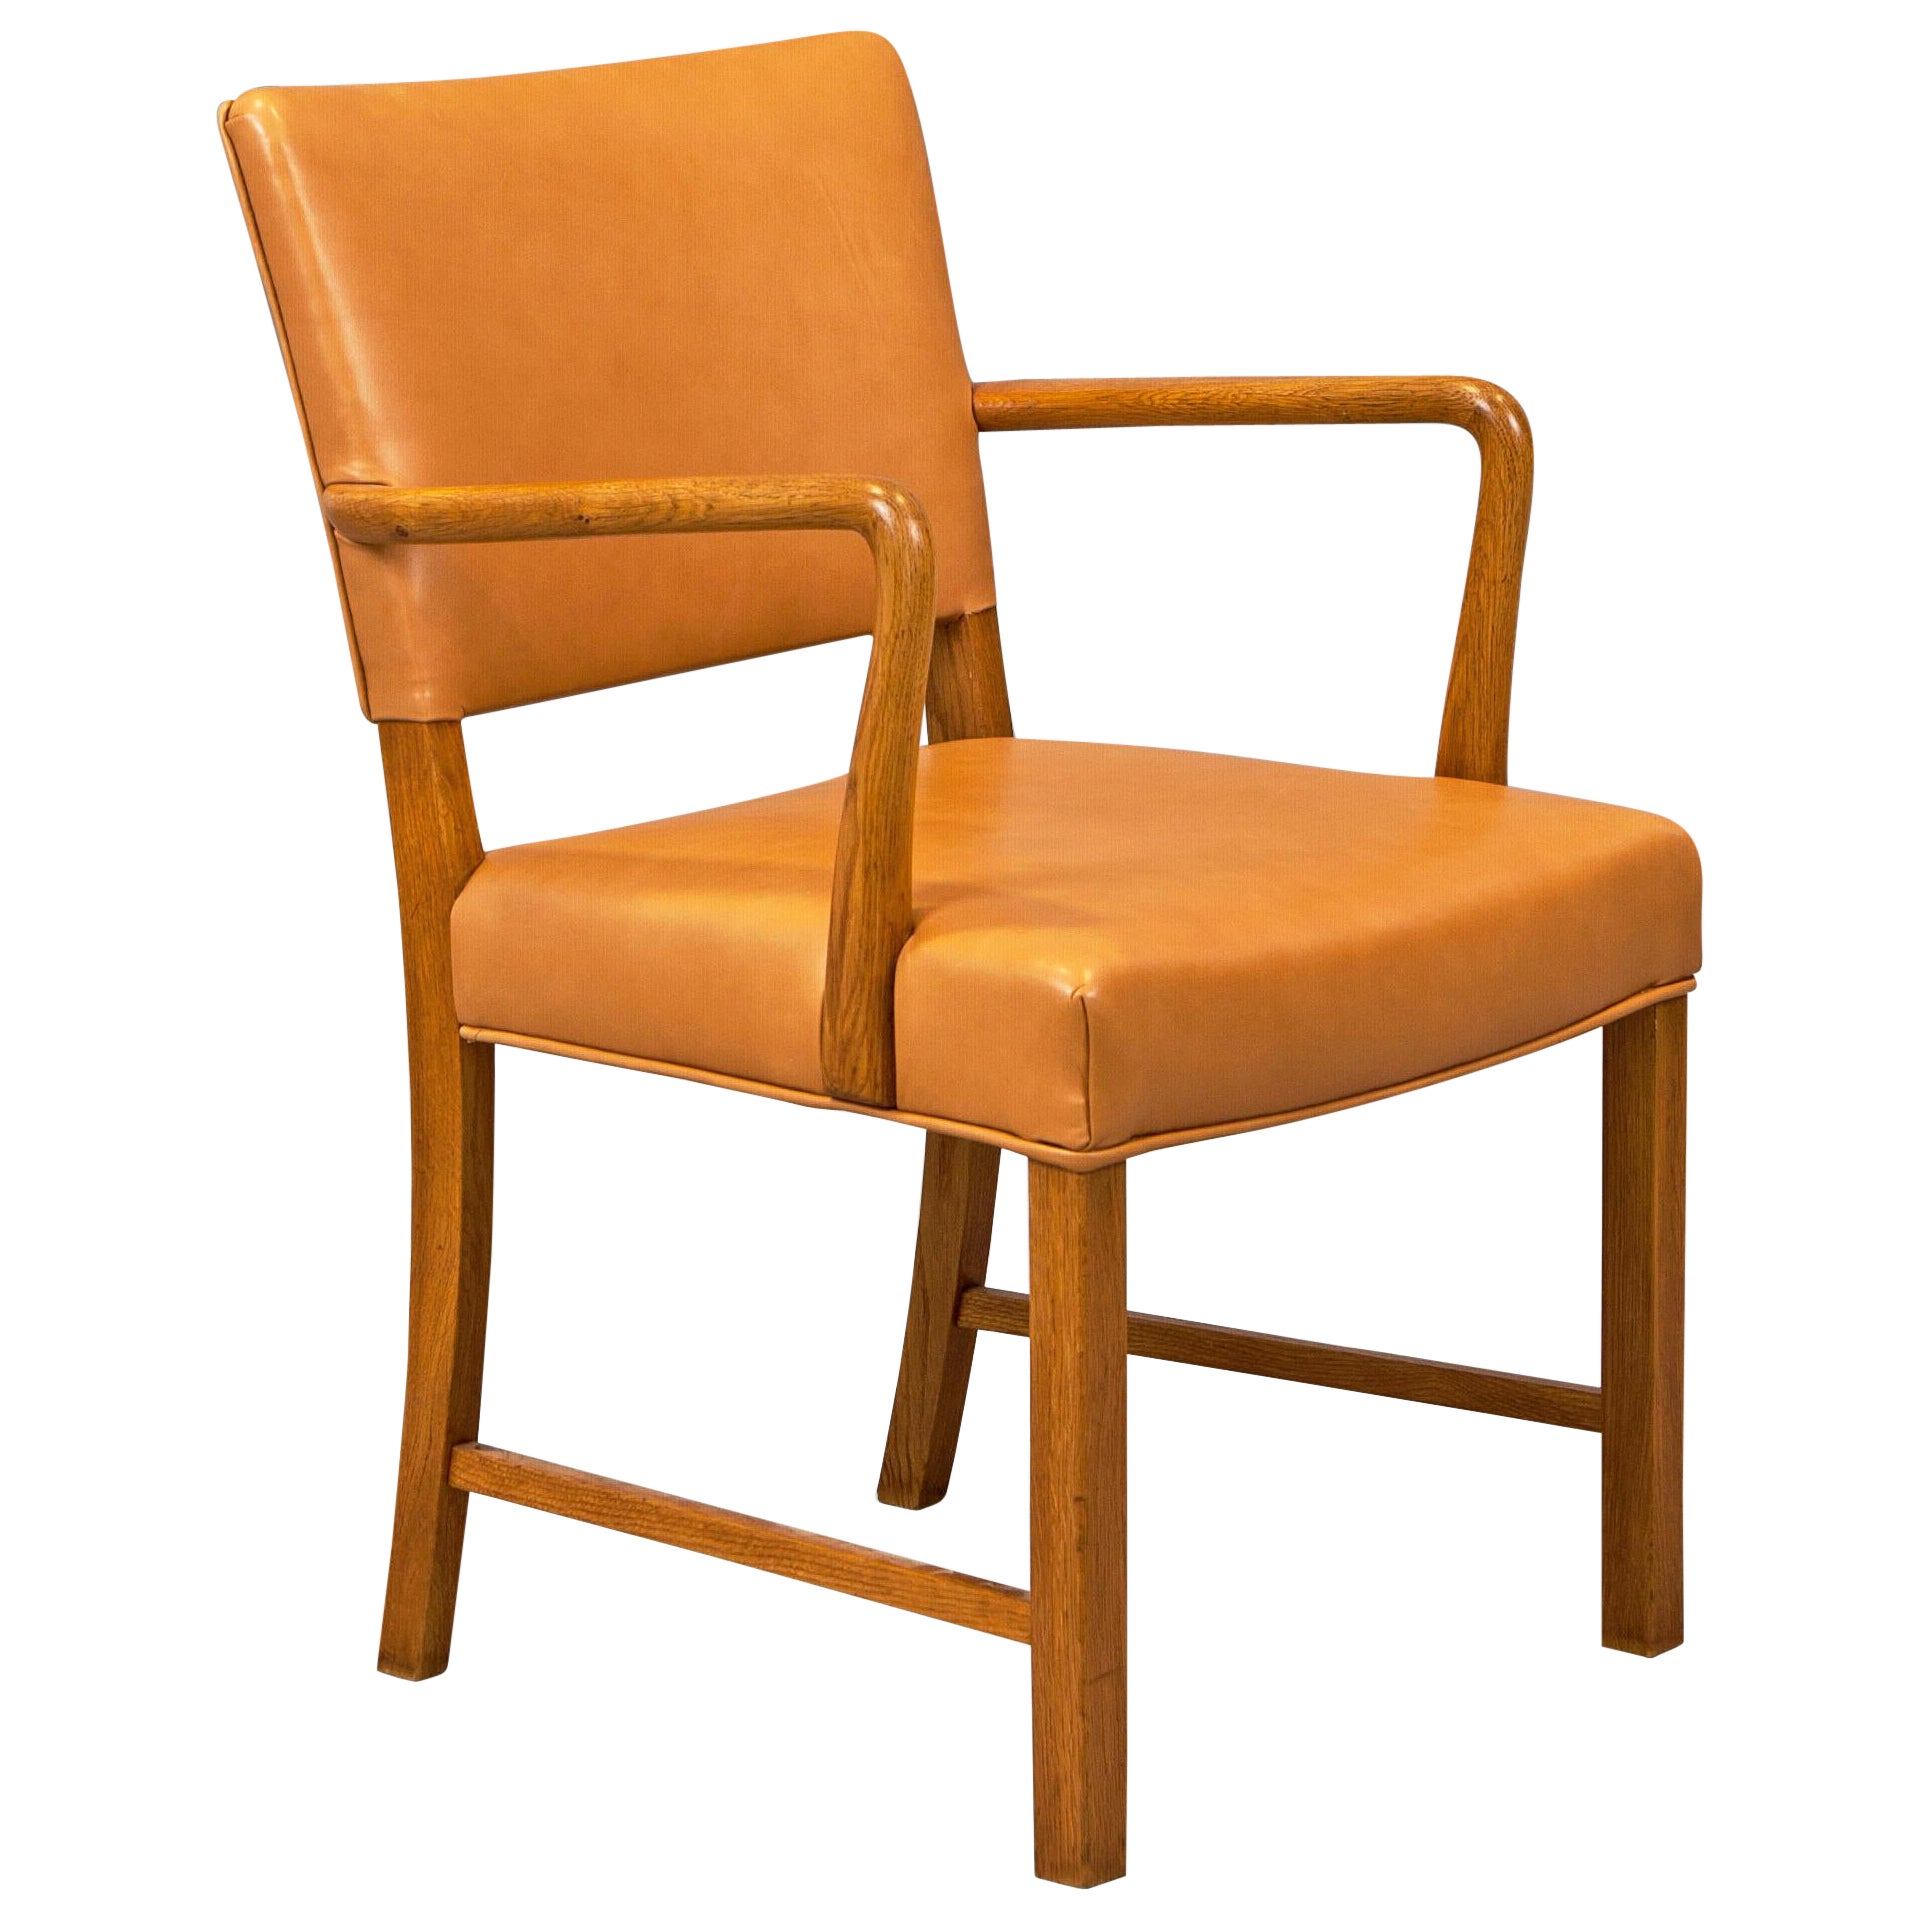 1930s Solid Oak and Leather Armchair Attributed to Kaare Klint